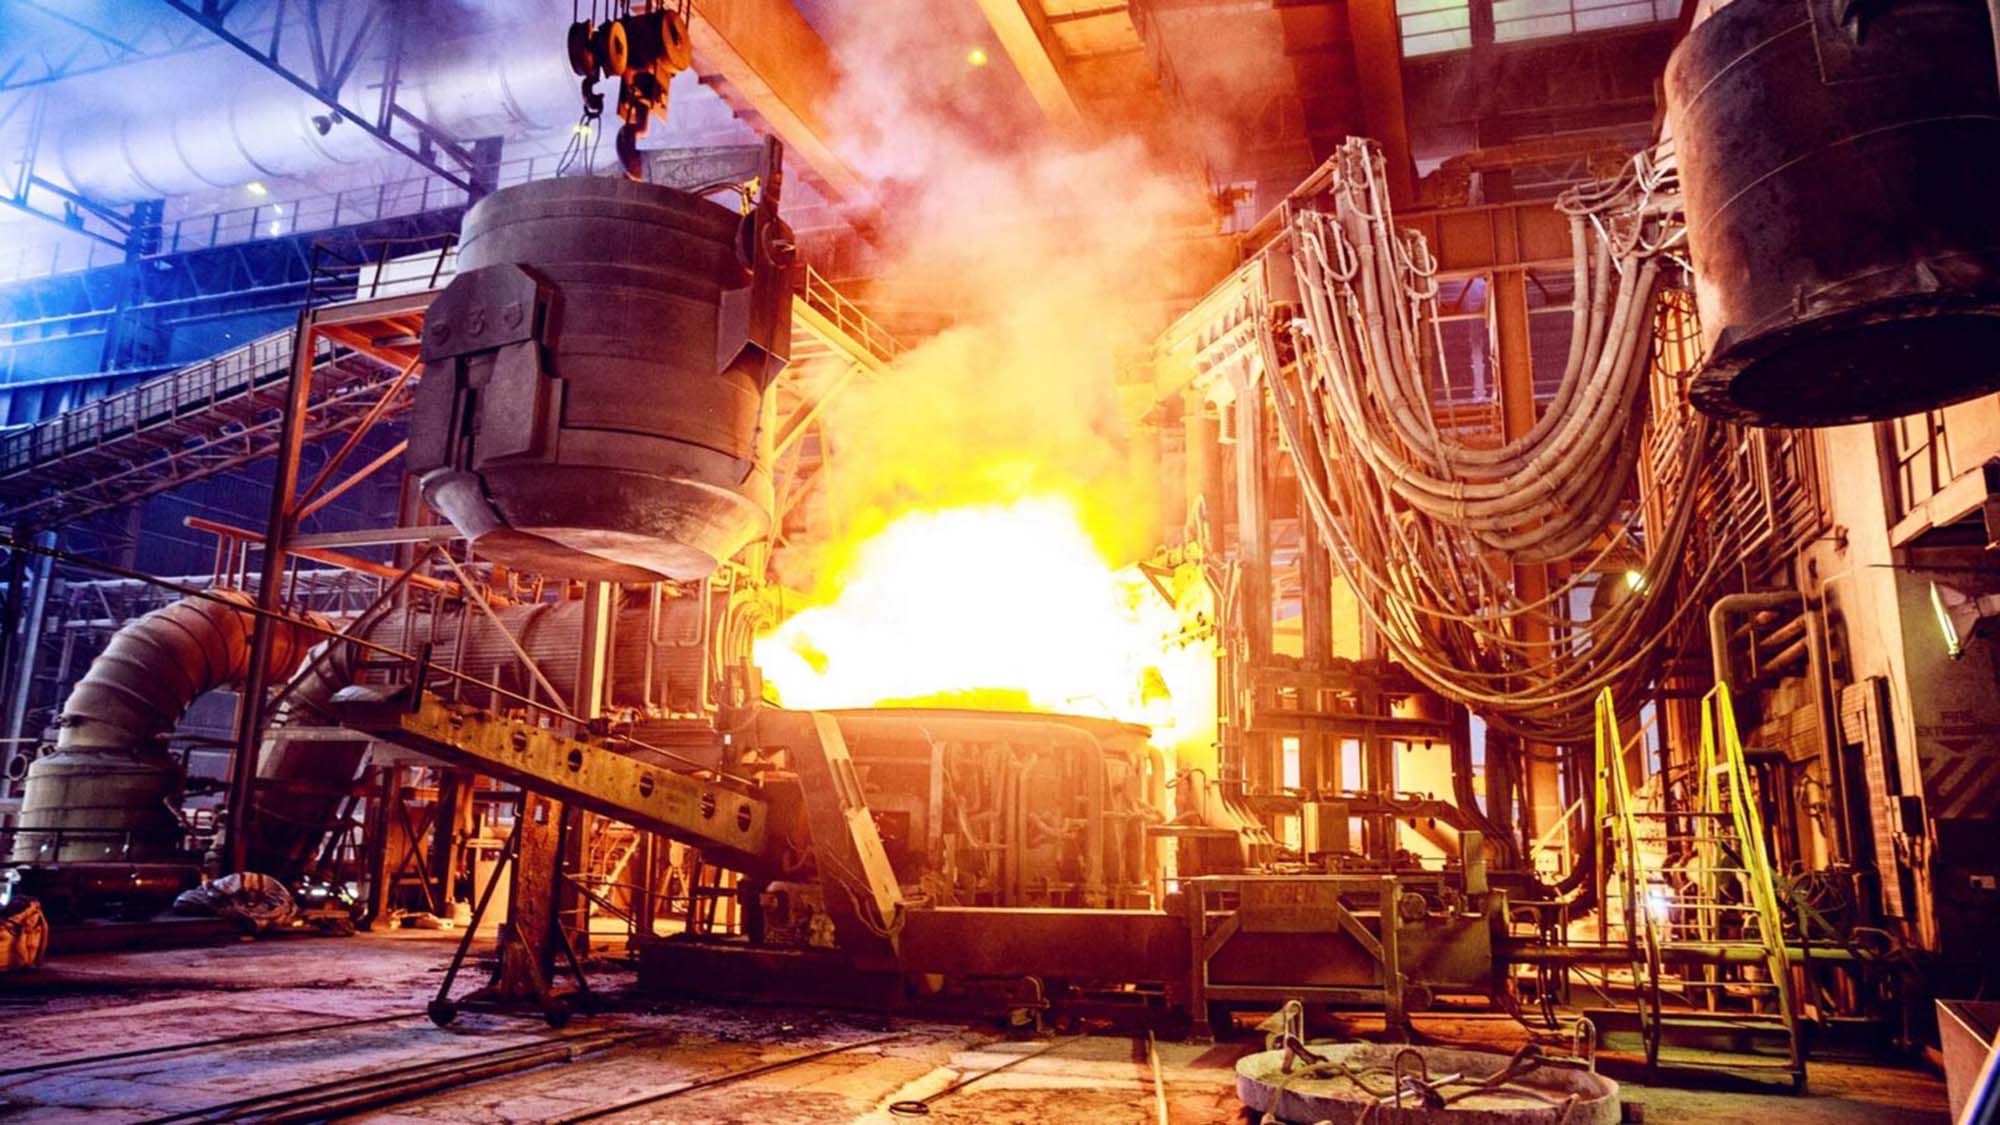 Stock image, possibly AI, of the innards of a hot, old fashioned looking factory with a huge fire burning in the center.